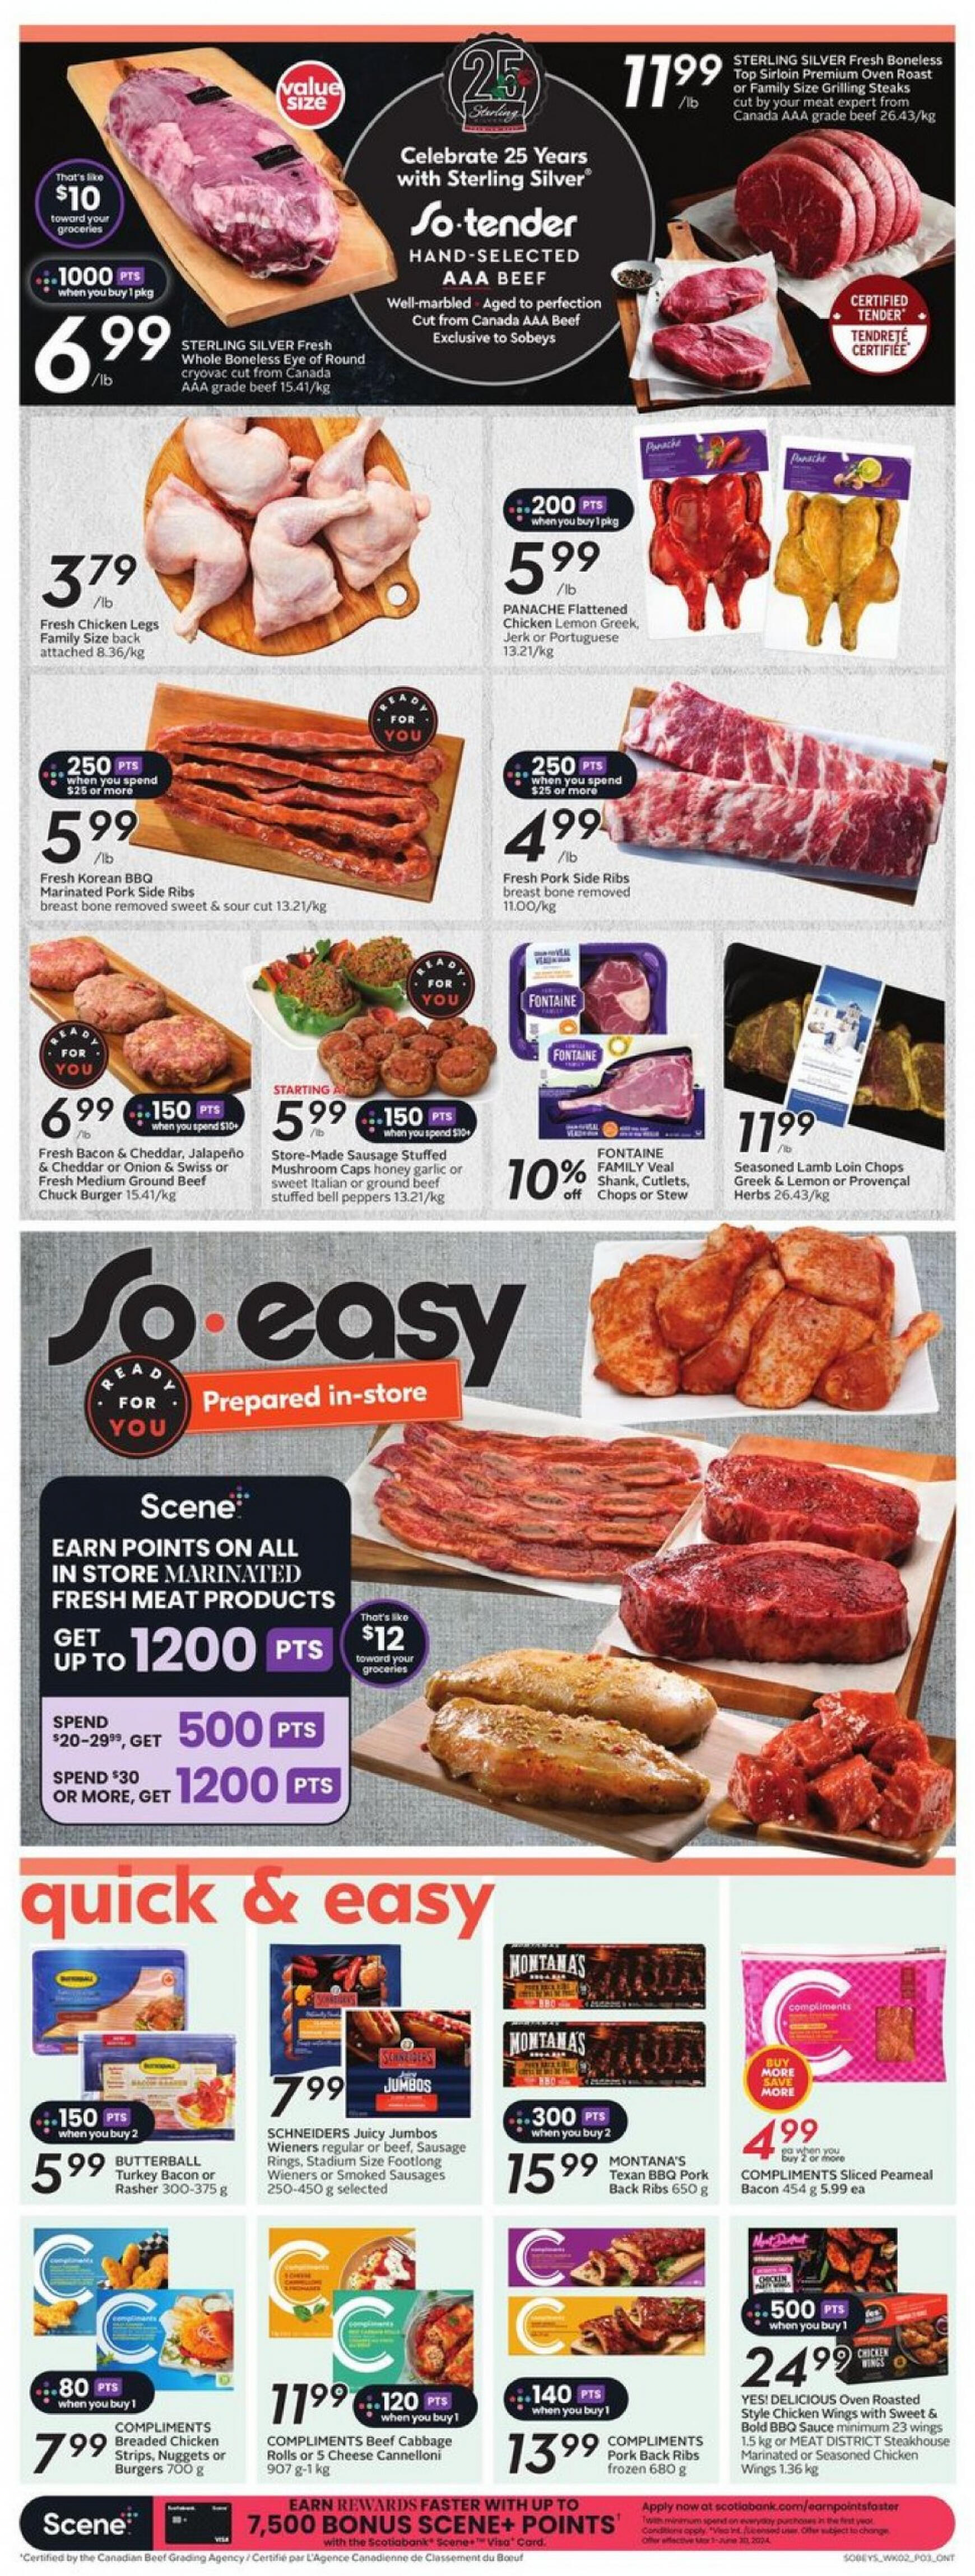 sobeys - Sobeys - Weekly Flyer - Ontario flyer current 09.05. - 15.05. - page: 7